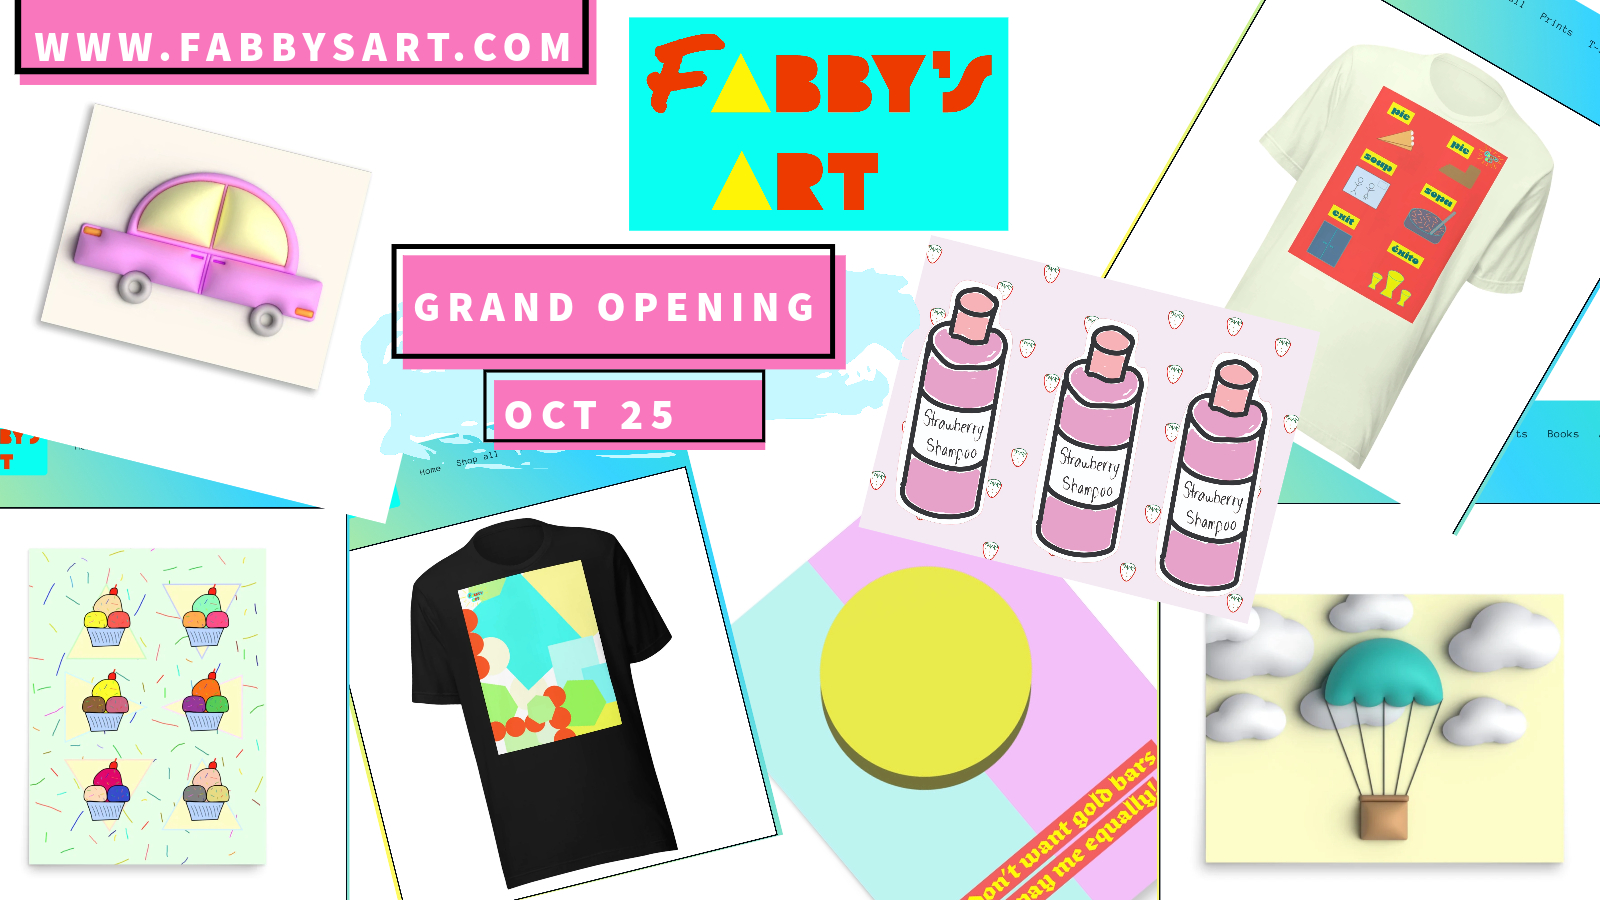 Fabby’s Art Grand Opening Online